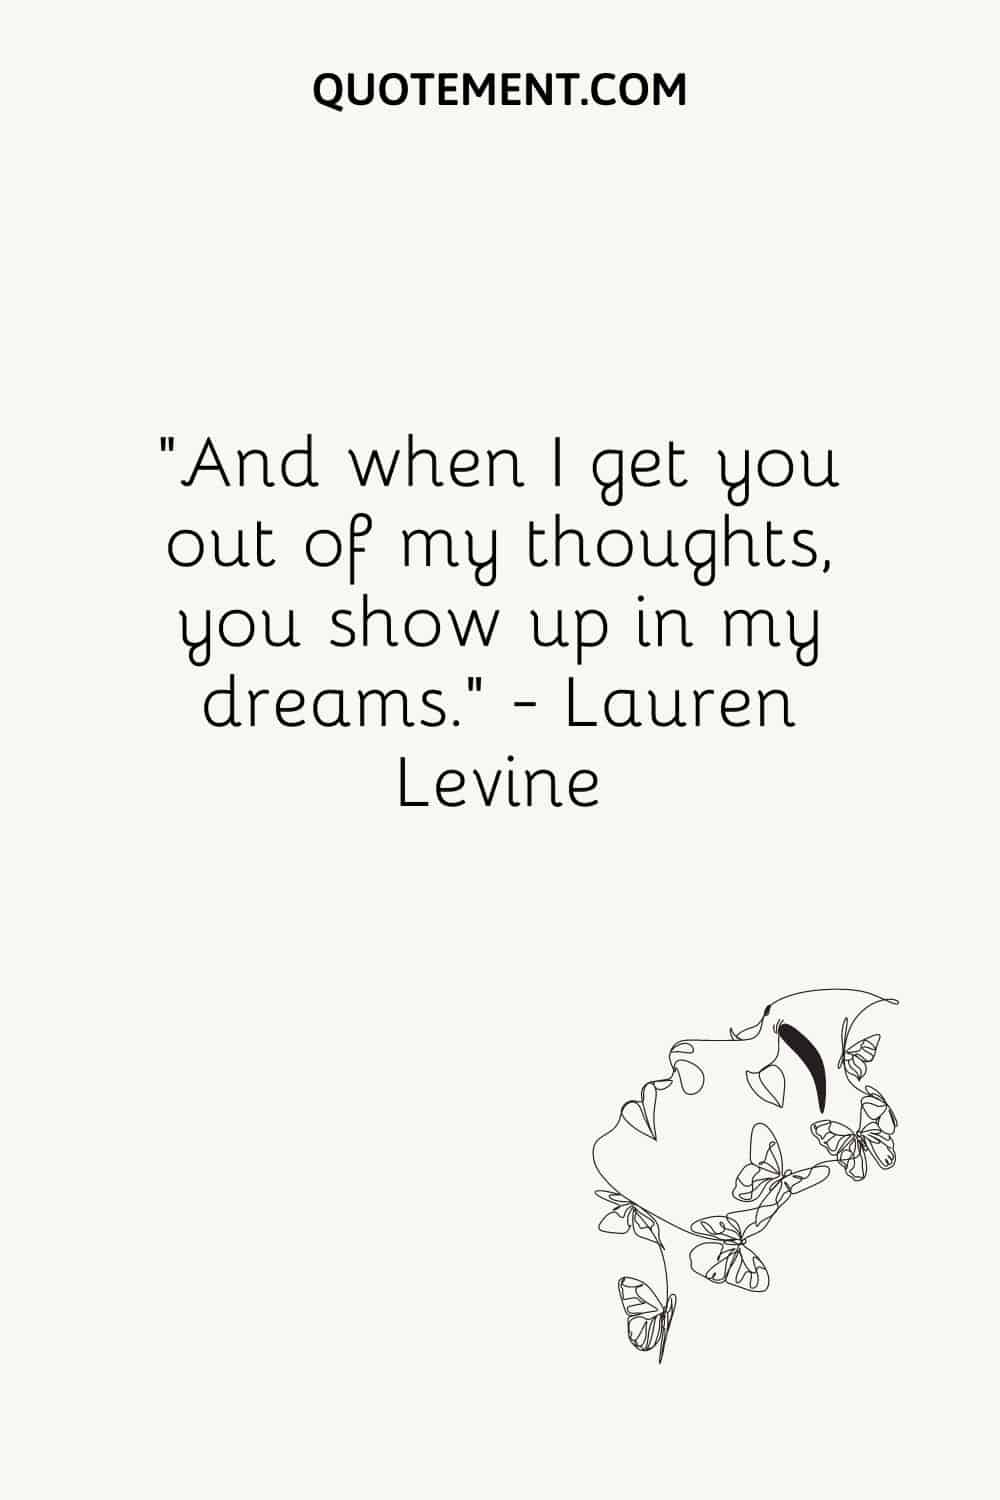 “And when I get you out of my thoughts, you show up in my dreams.” — Lauren Levine